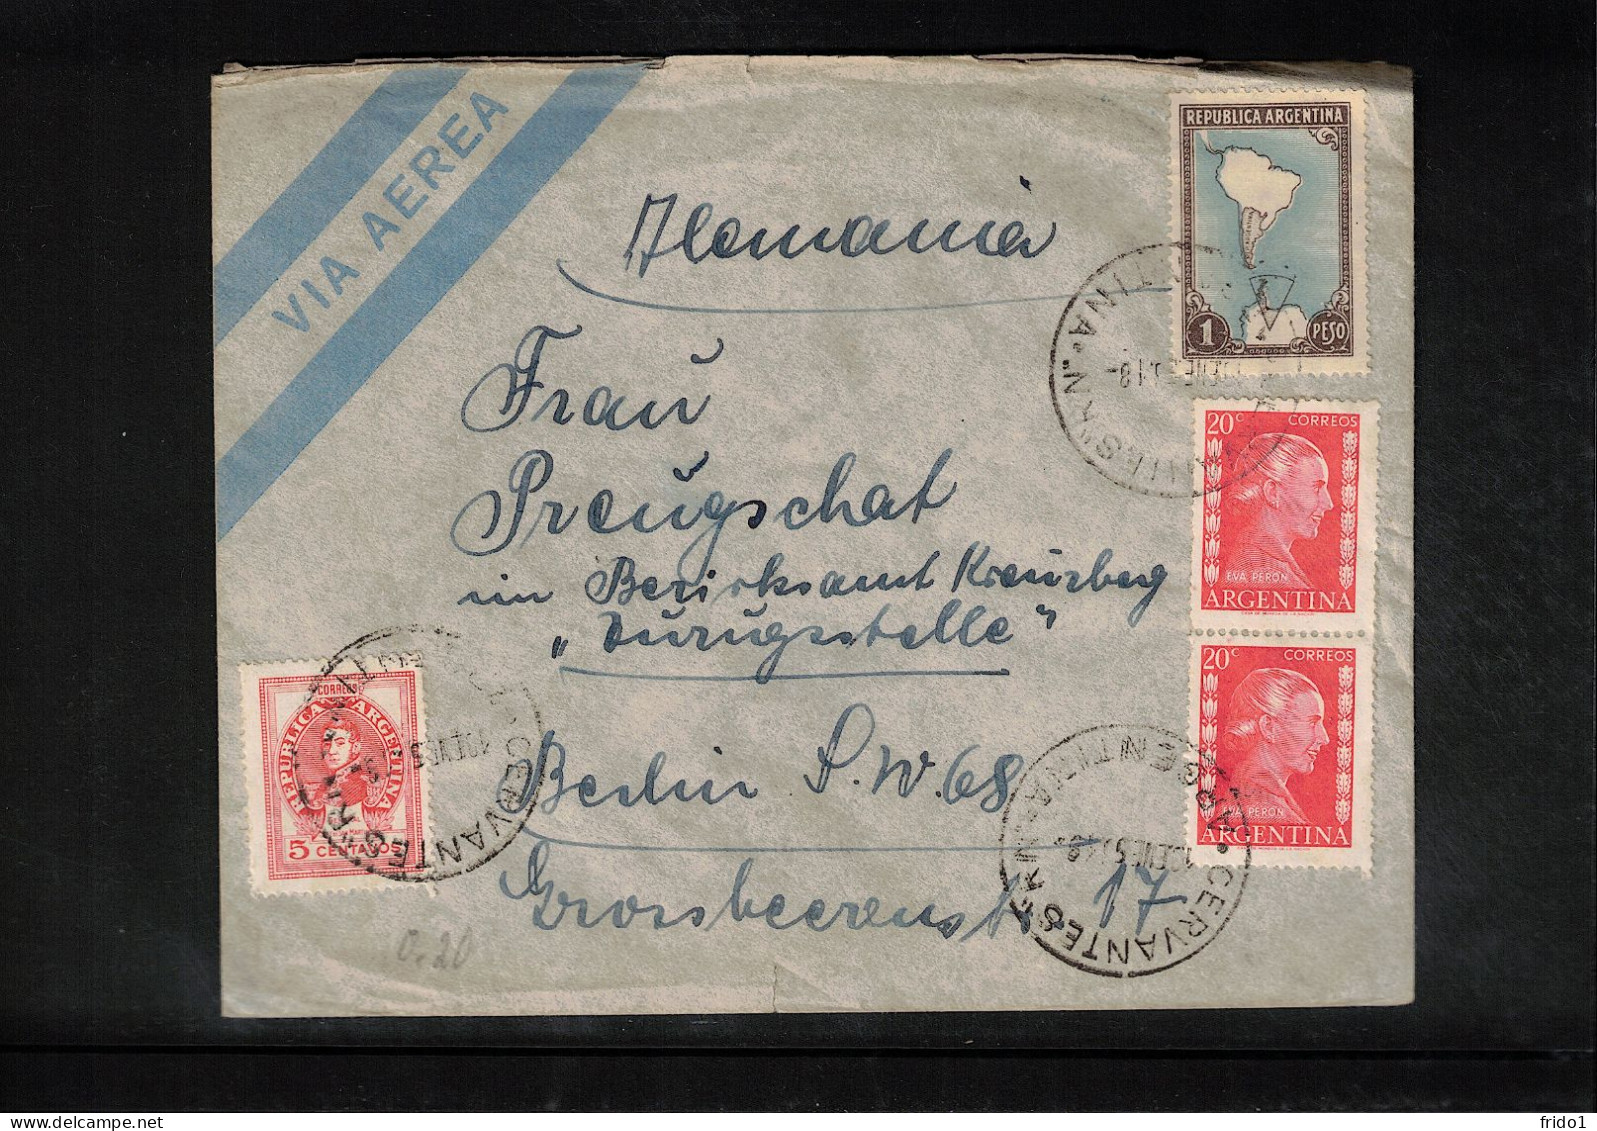 Argentina 1951 Interesting Airmail Letter - Covers & Documents